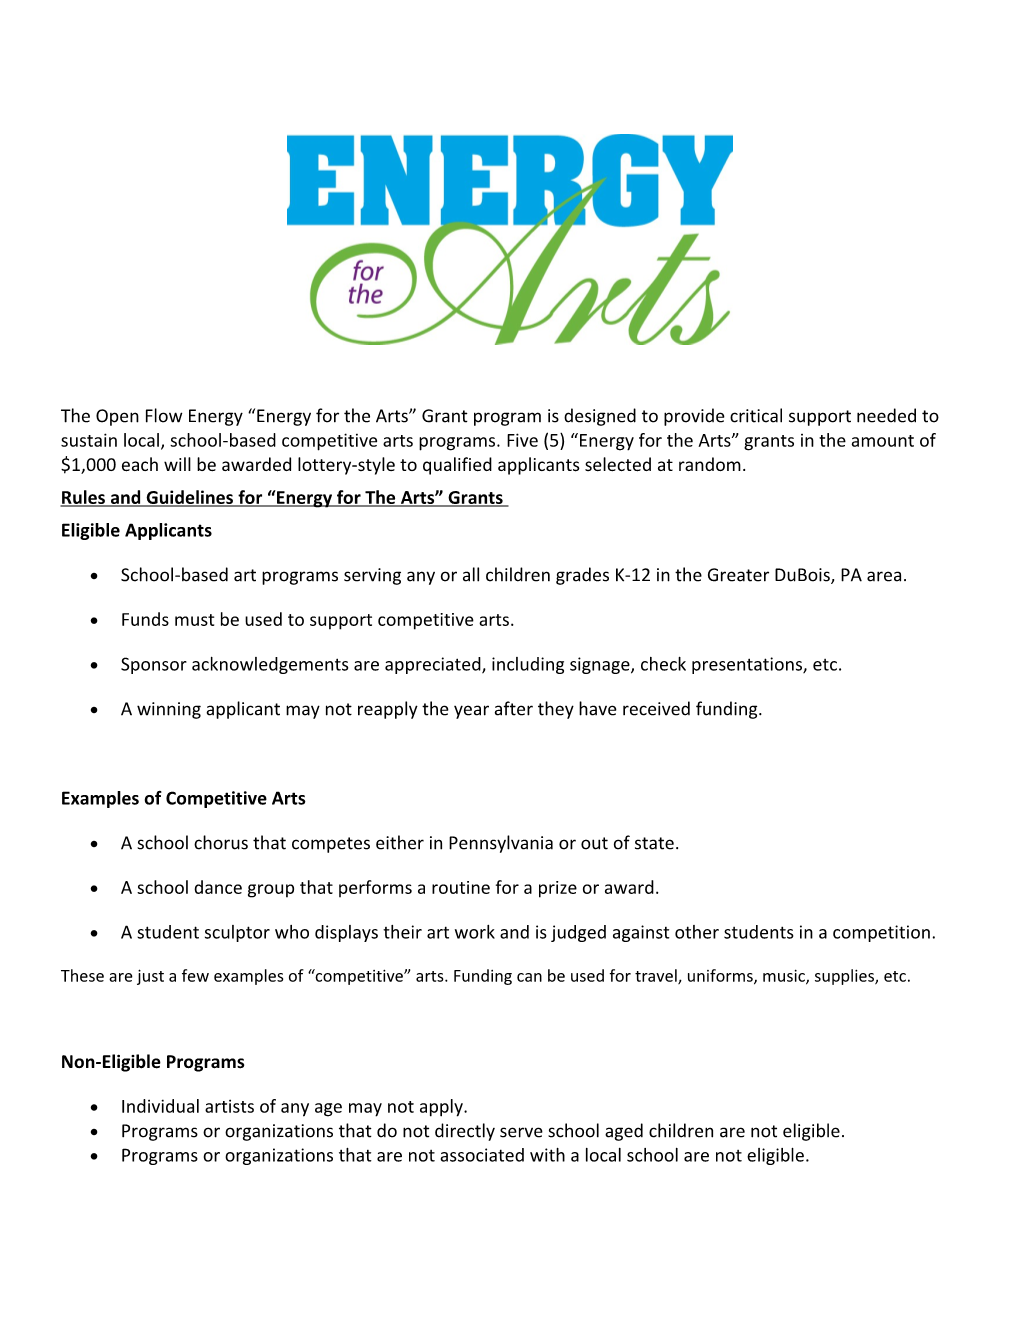 Rules and Guidelines for Energy for the Arts Grants